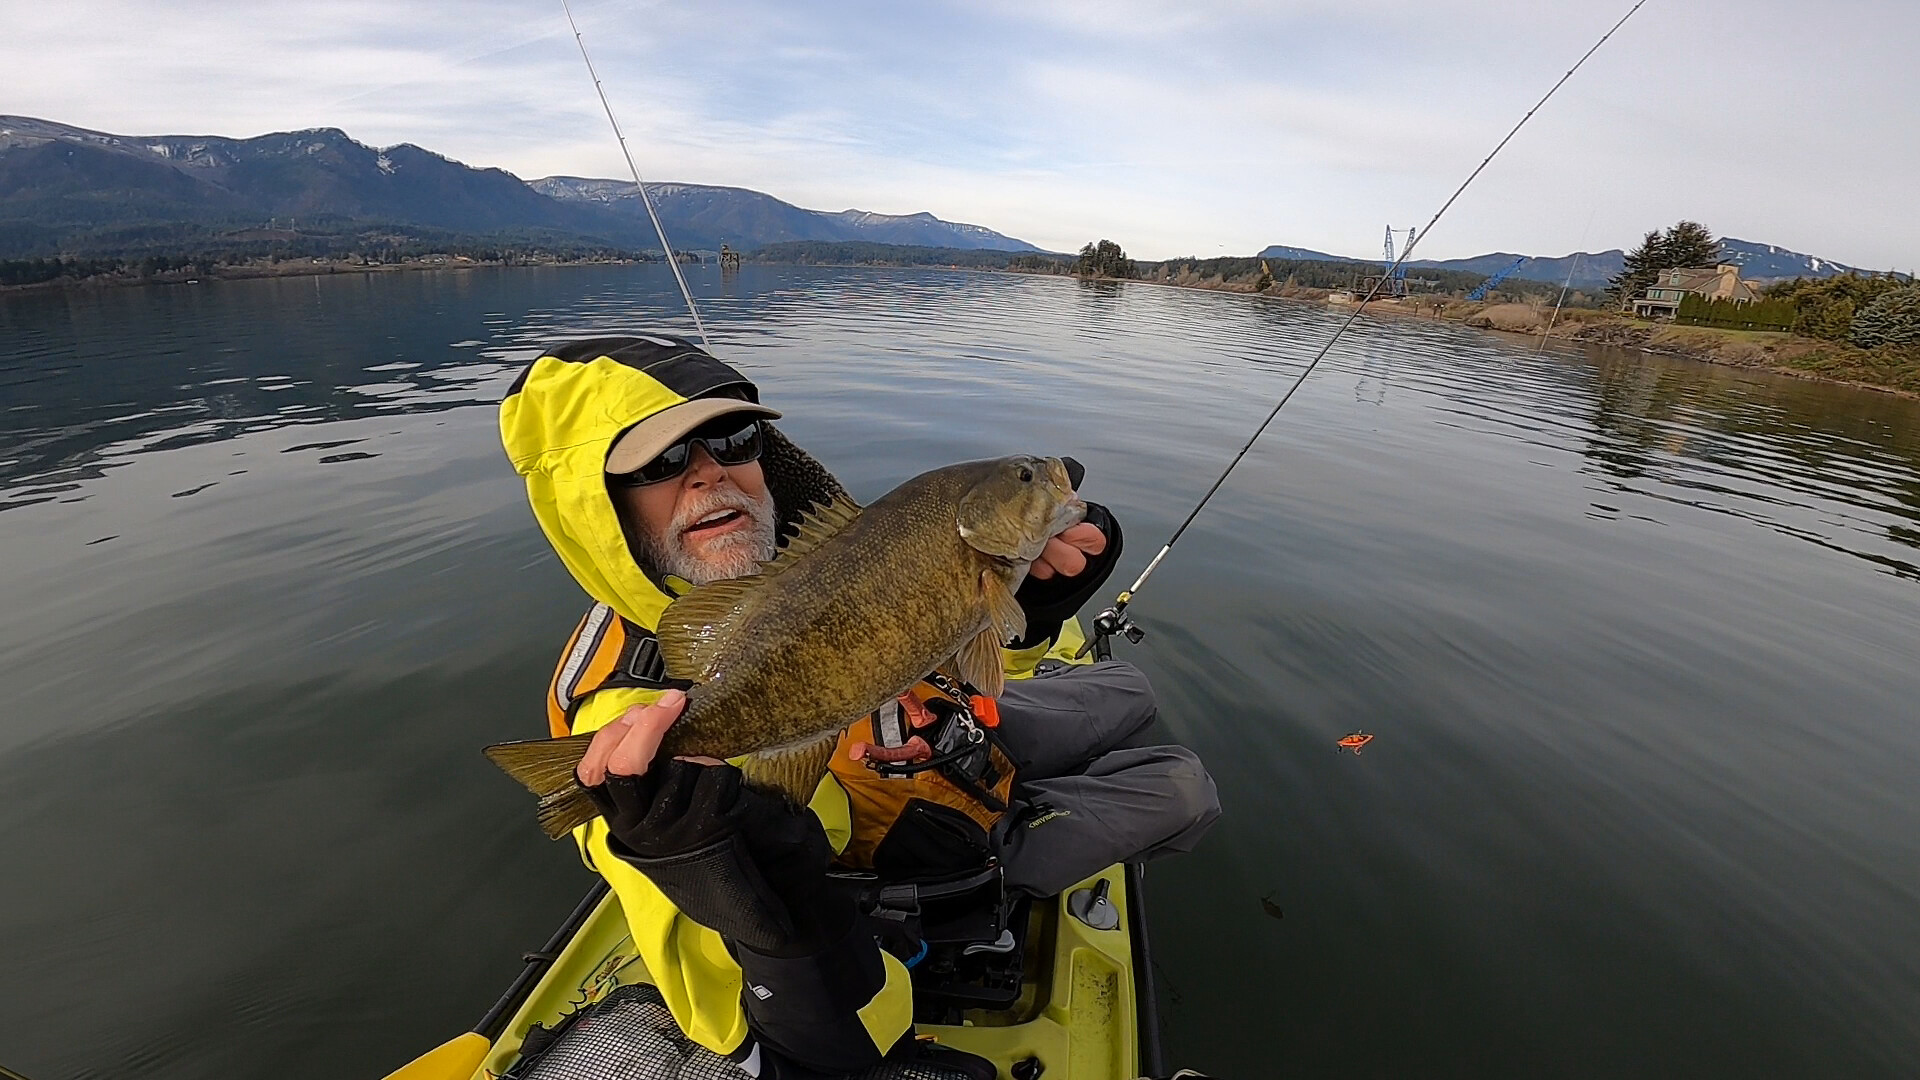 5lb 14oz smallmouth and my best big smallmouth day ever!